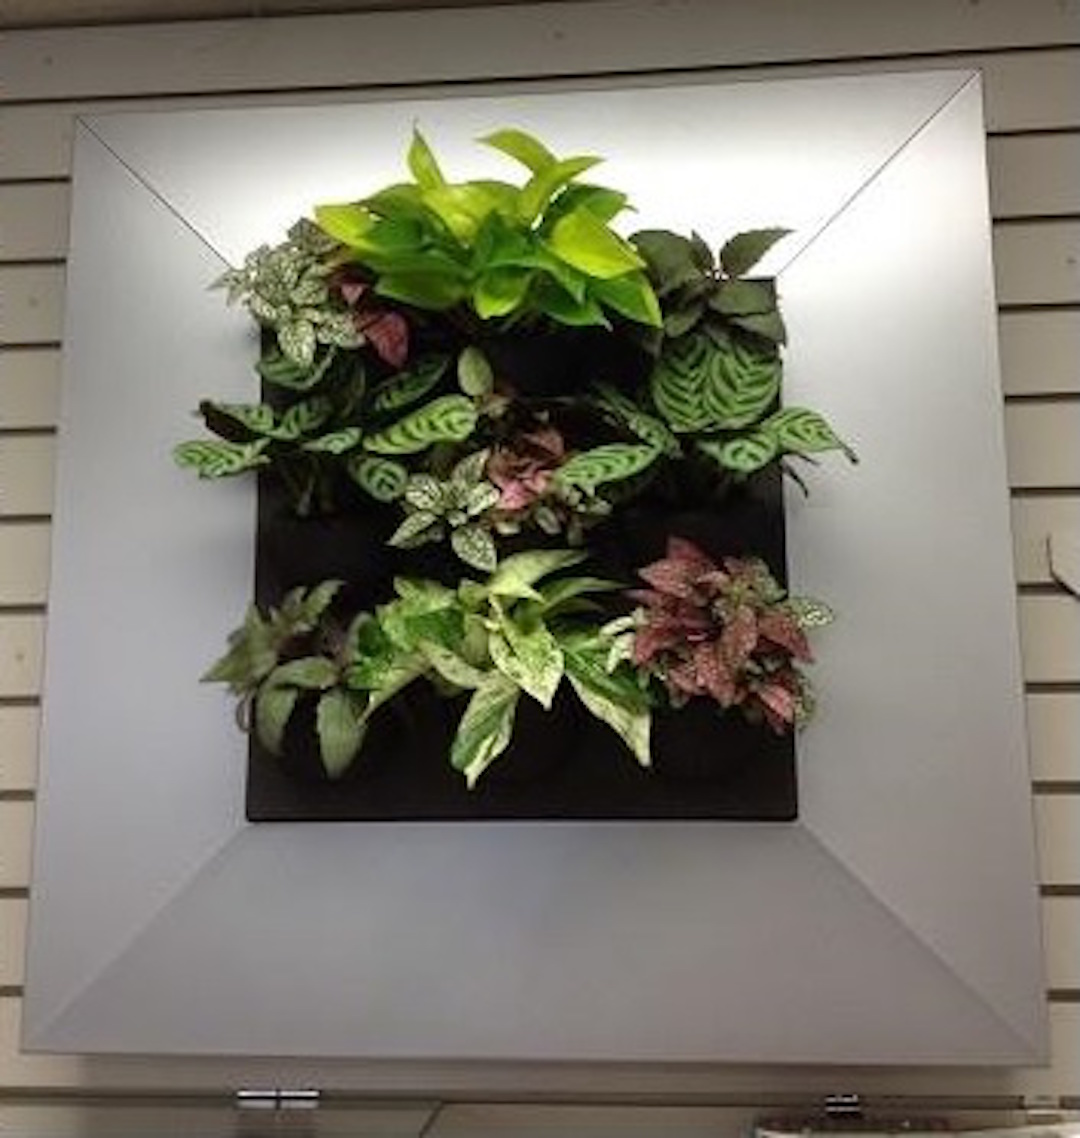 Living plant picture with live green plants in a silver frame